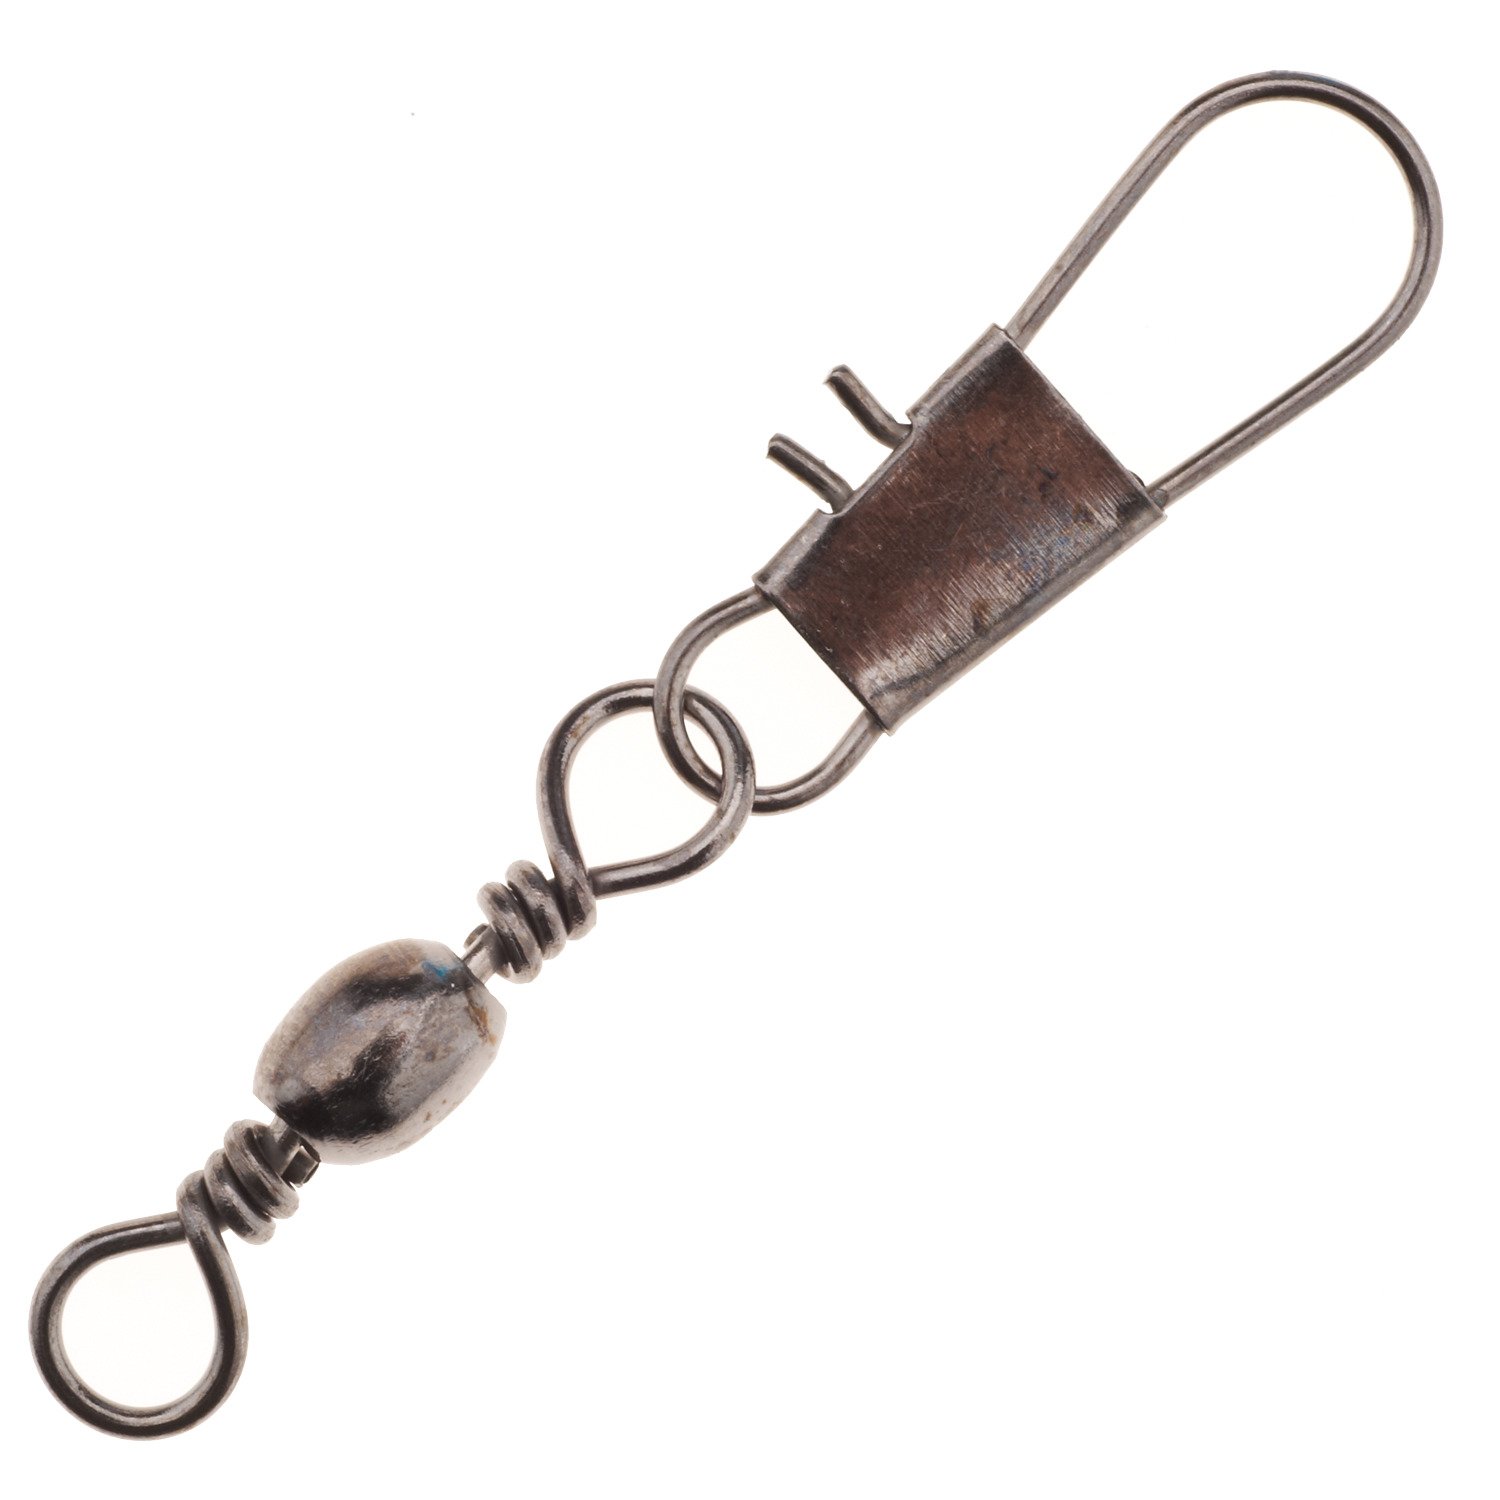  Fishing Swivels & Snaps - $100 To $200: Sports & Outdoors